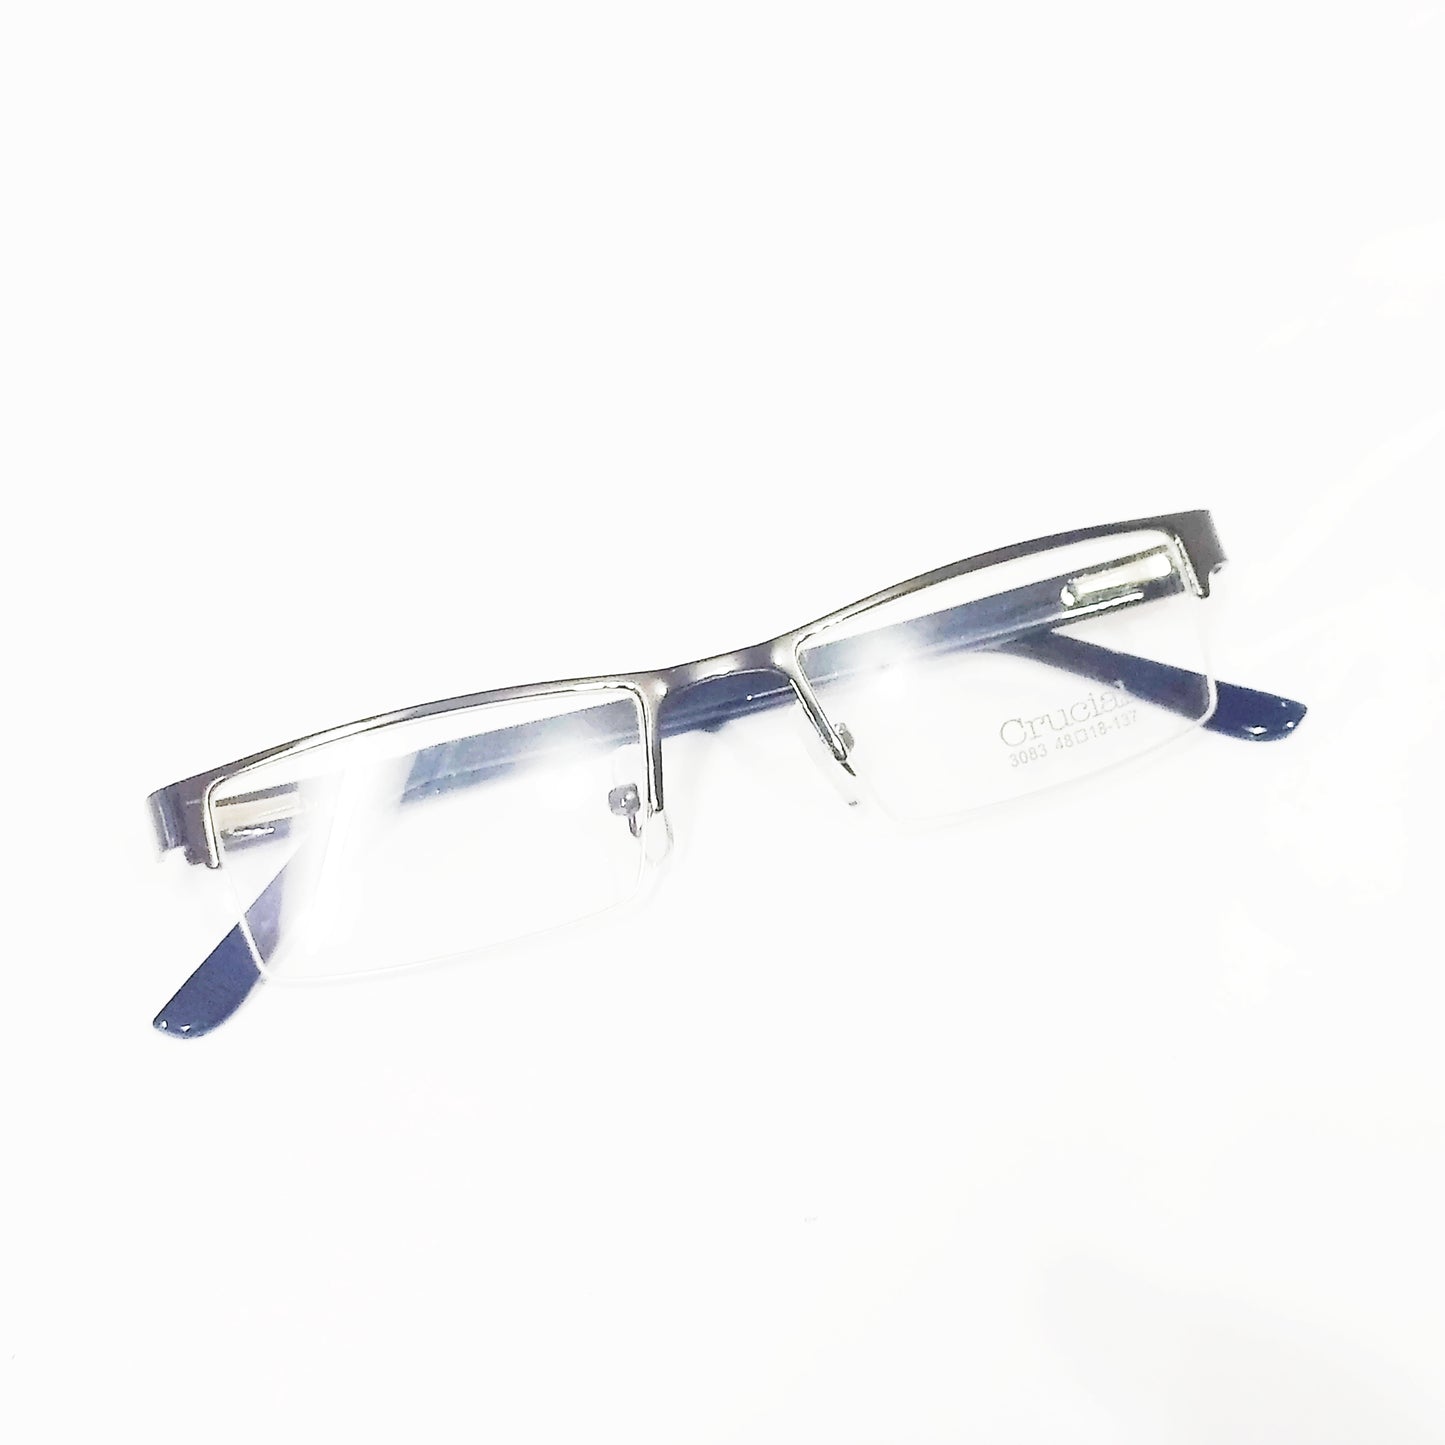 Grey Metal Supra Spectacle Frame Glasses For Women and Men